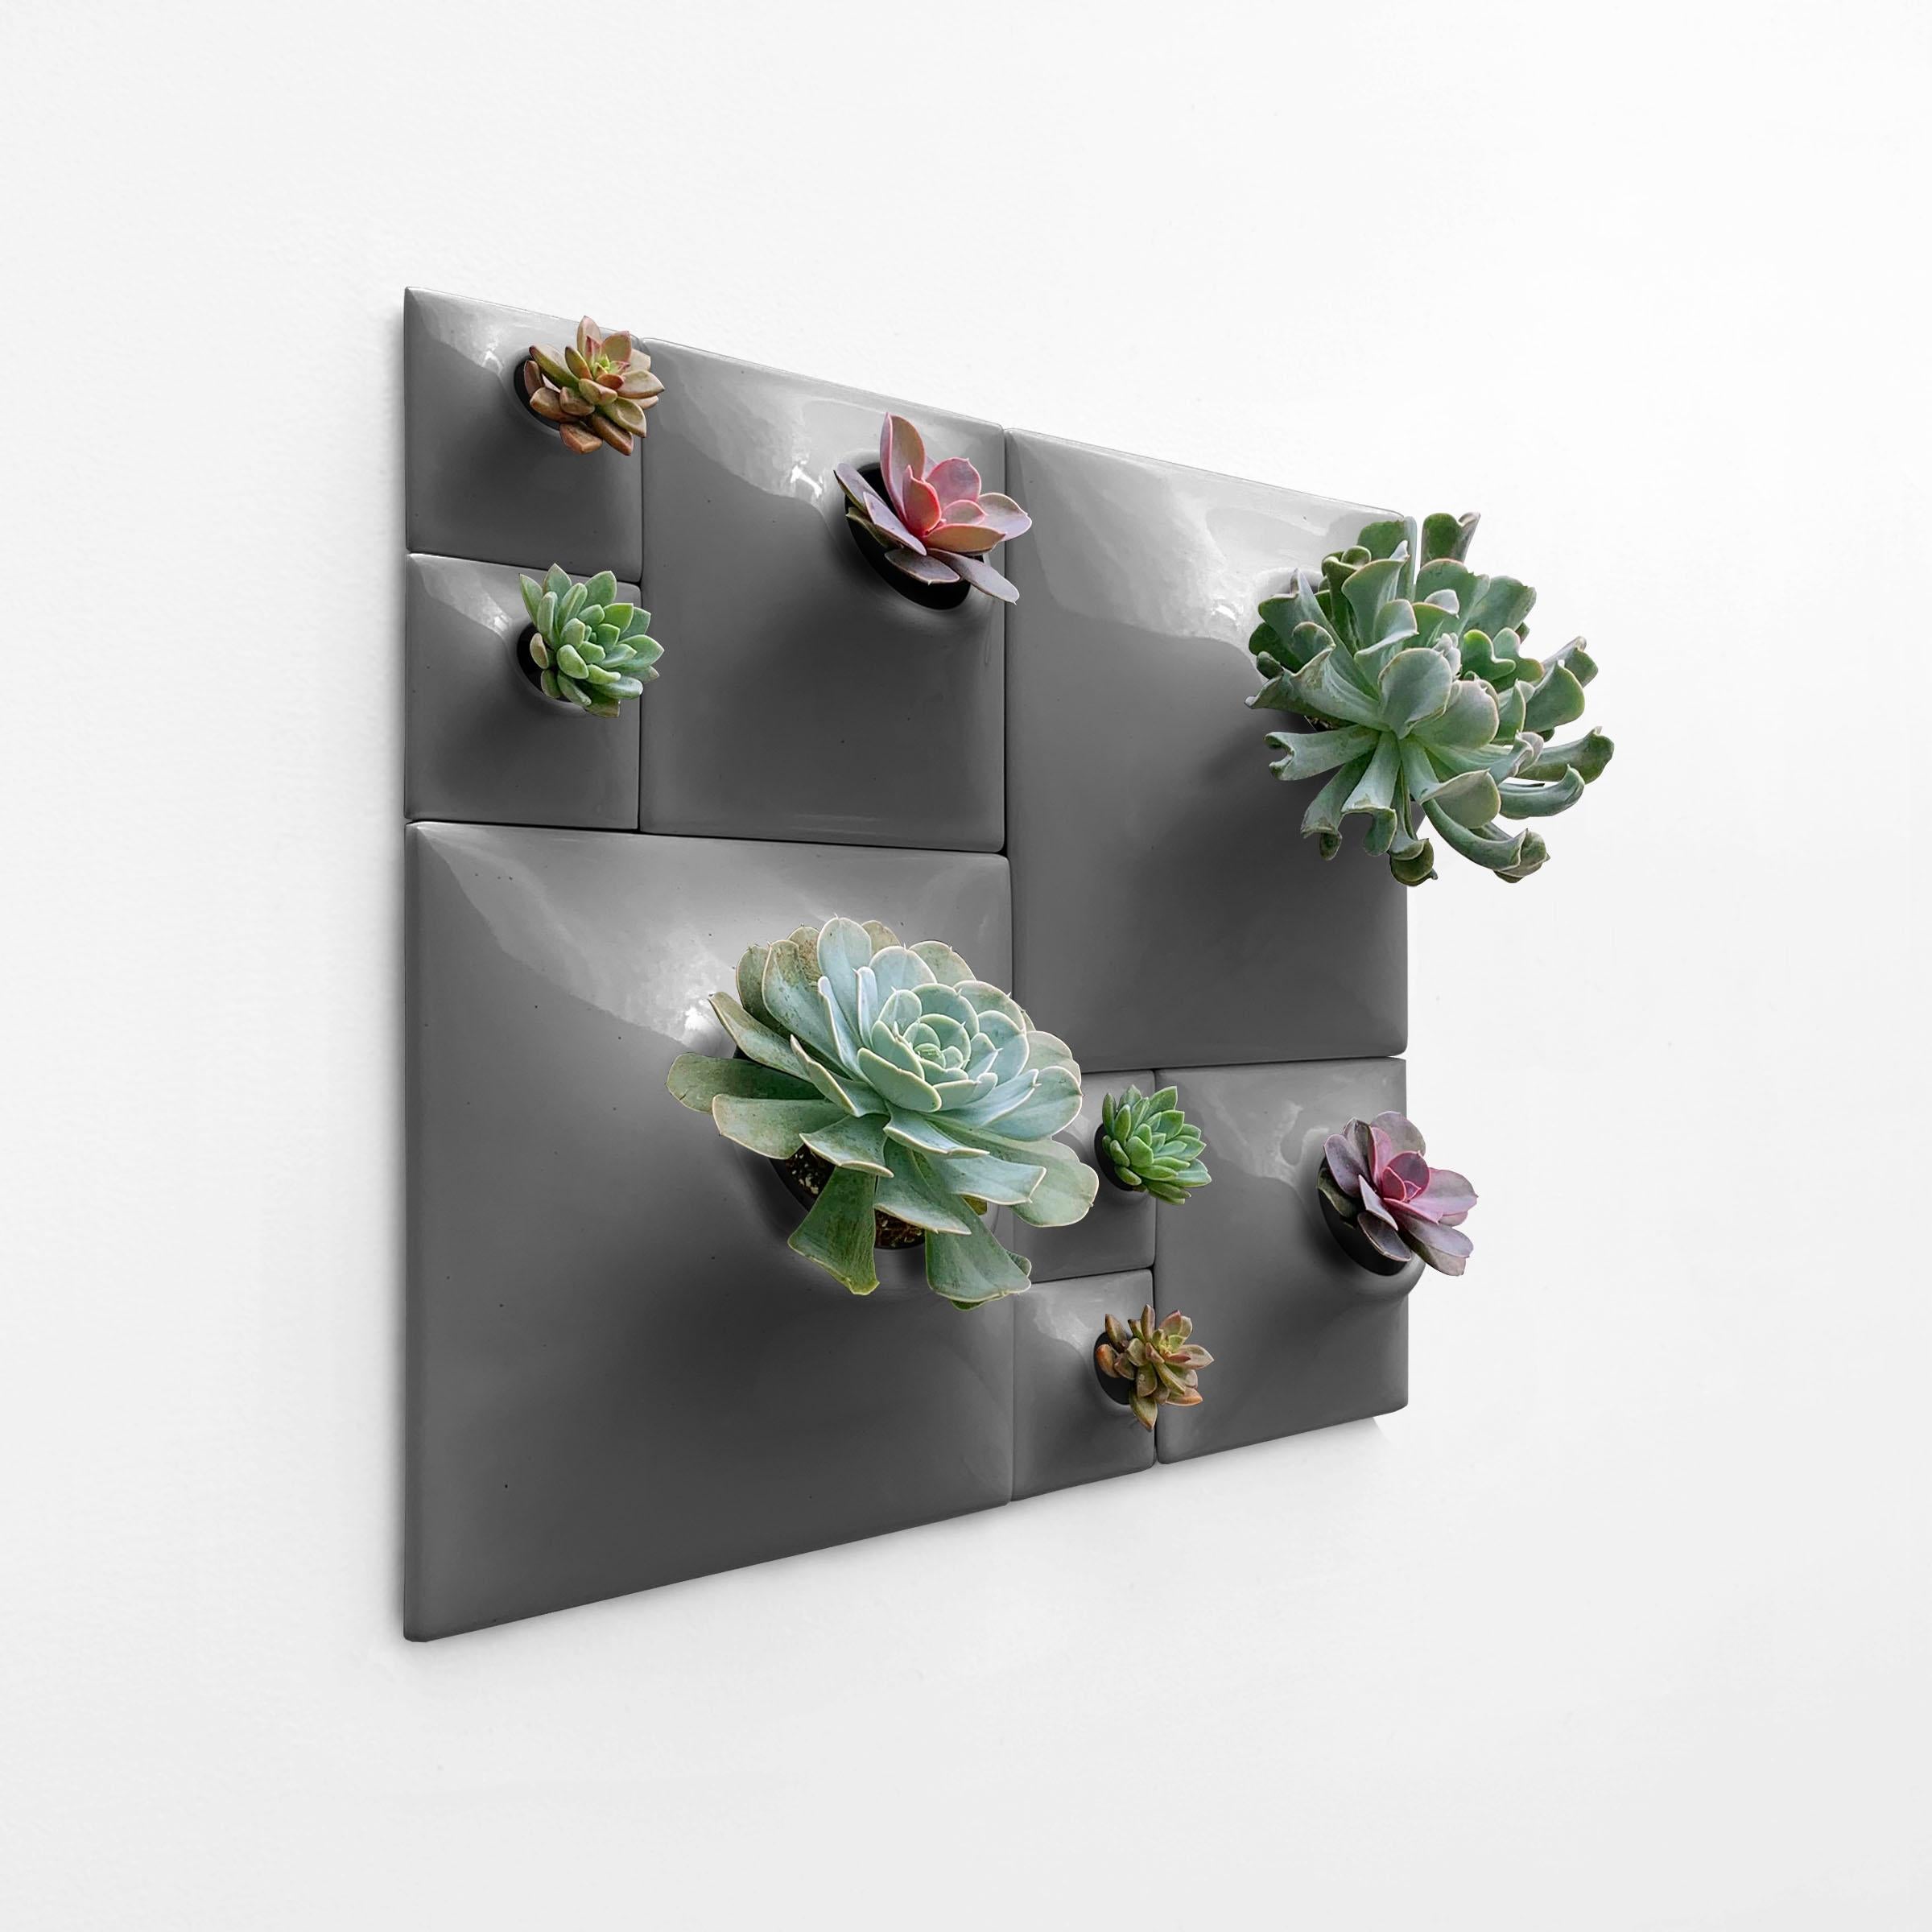 Modern Gray Wall Planter Set, Greenwall Sculpture, Living Wall Decor, Node BS2D In New Condition For Sale In Bridgeport, PA